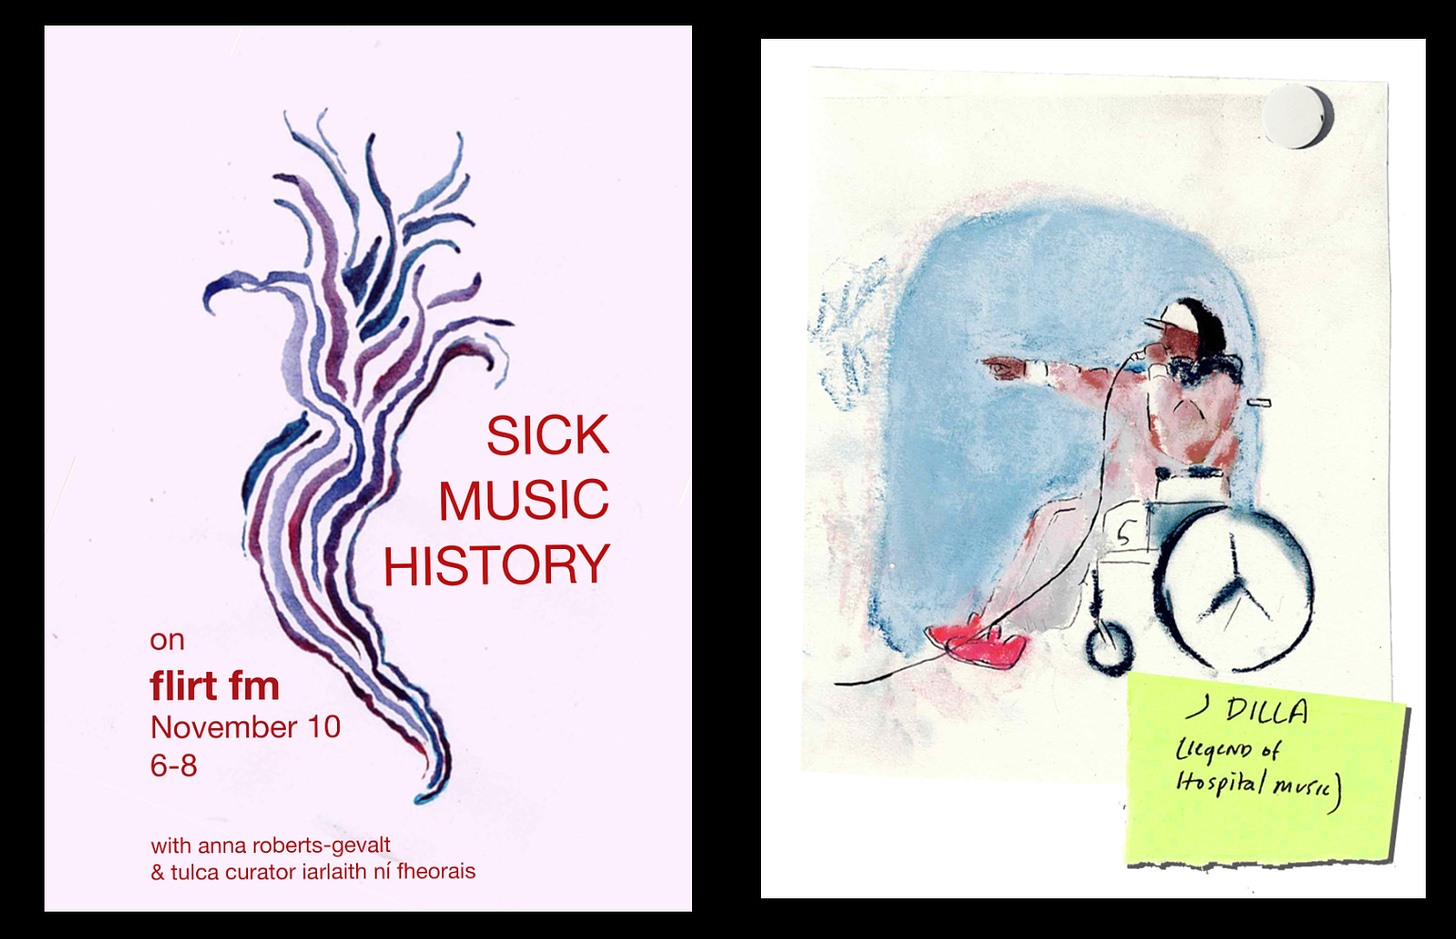 Two watercolor works. A poster for Sick Music History has blue and purple lines snaking their way up and out. A Black wheelchair user labeled J Dilla (legend of hospital music) is holding a mic and pointing out into an audience out of the frame.